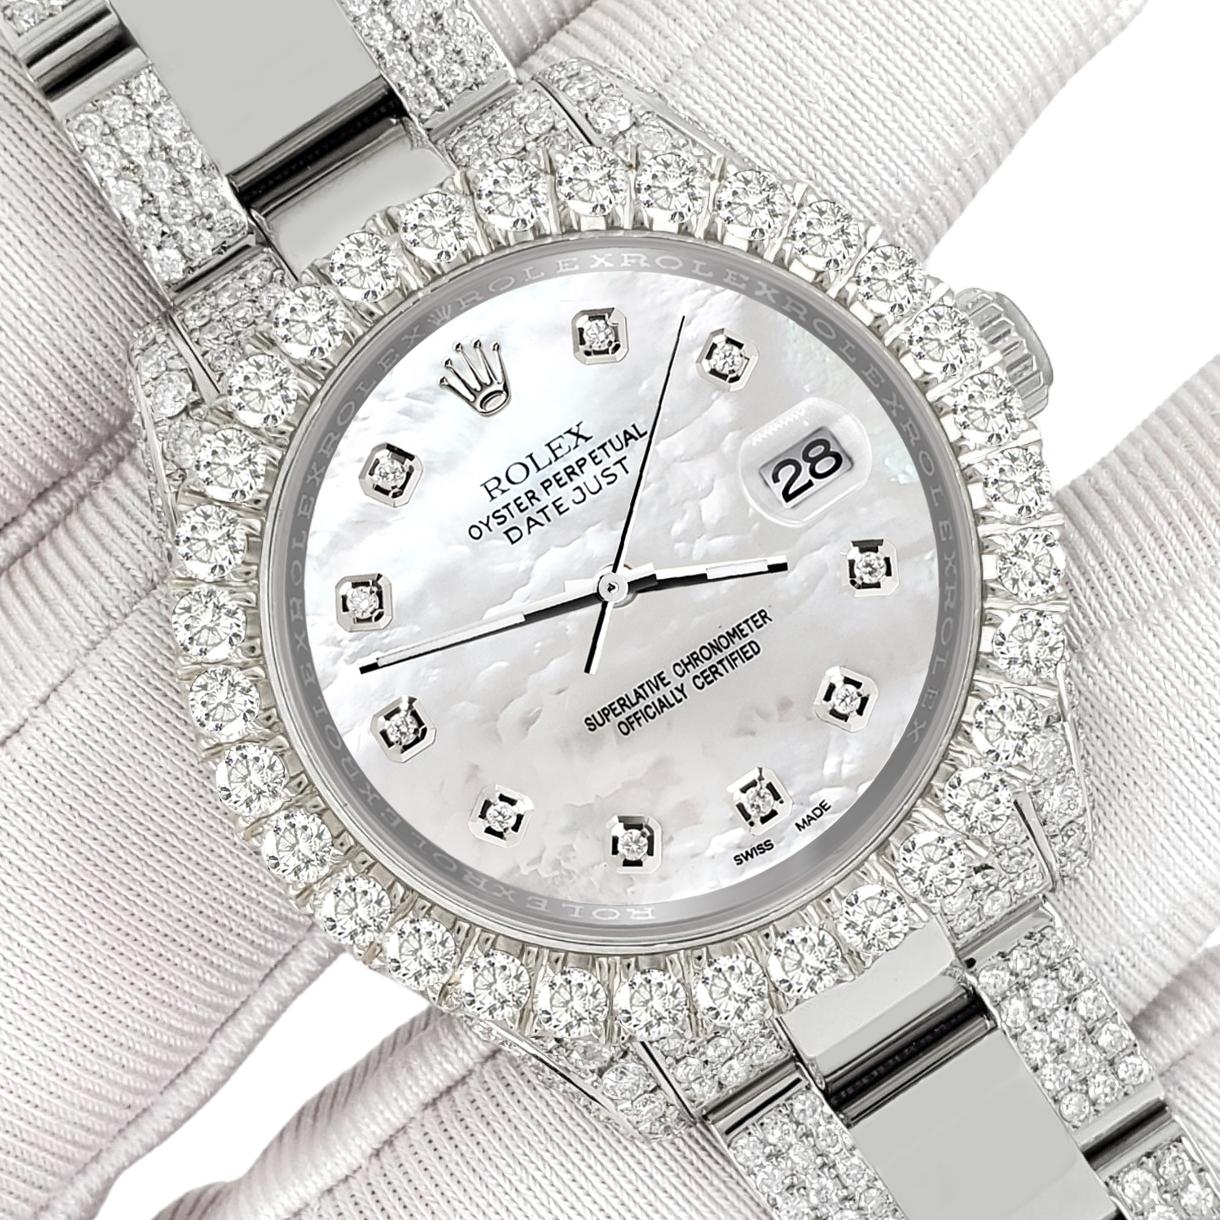 ElegantSwiss Watch Co is delighted to offer you this Rolex Datejust Midsize 31mm Pave 7.2ct Iced Diamond White MOP Dial Oyster Watch, Ref 178240.

Excellent, pristine condition, no signs of wear, works flawlessly, comes with Rolex box, certificate